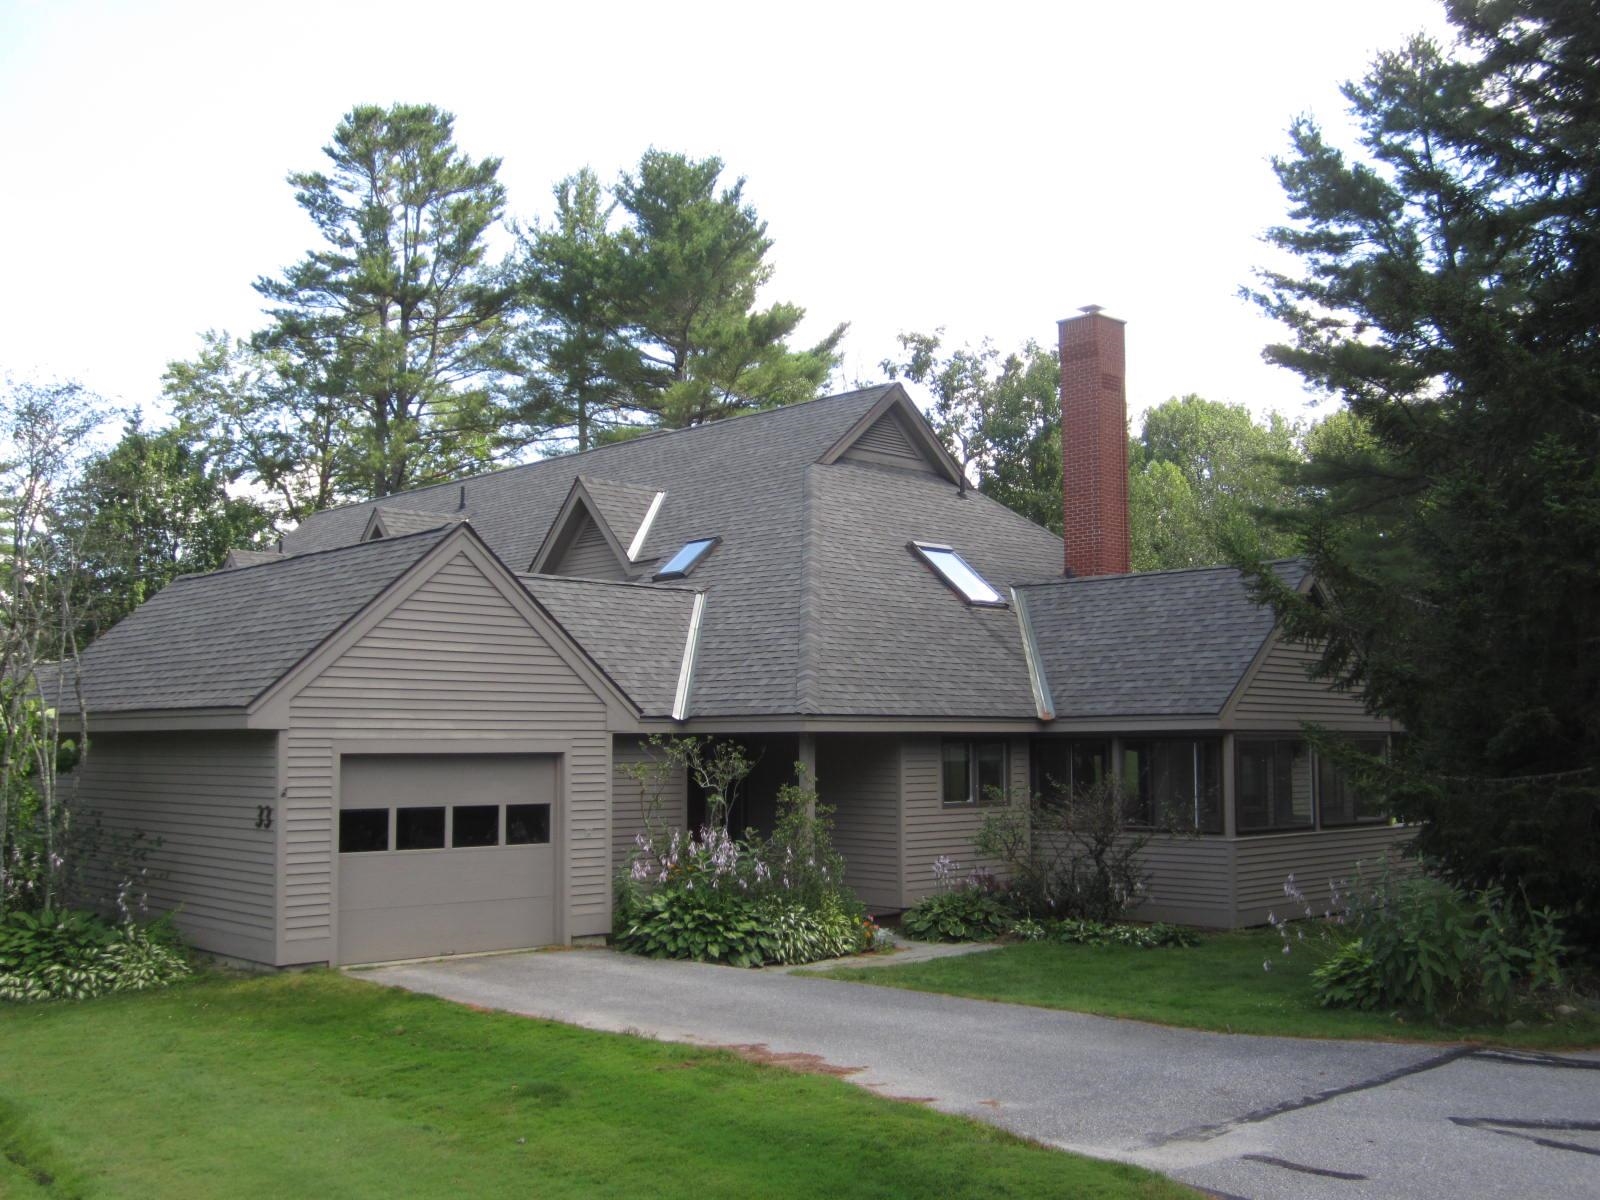 33 The Seasons Lane, New London, New Hampshire, NH 03257, 3 Bedrooms Bedrooms, 7 Rooms Rooms,2 BathroomsBathrooms,Condos,For Rent,4923652